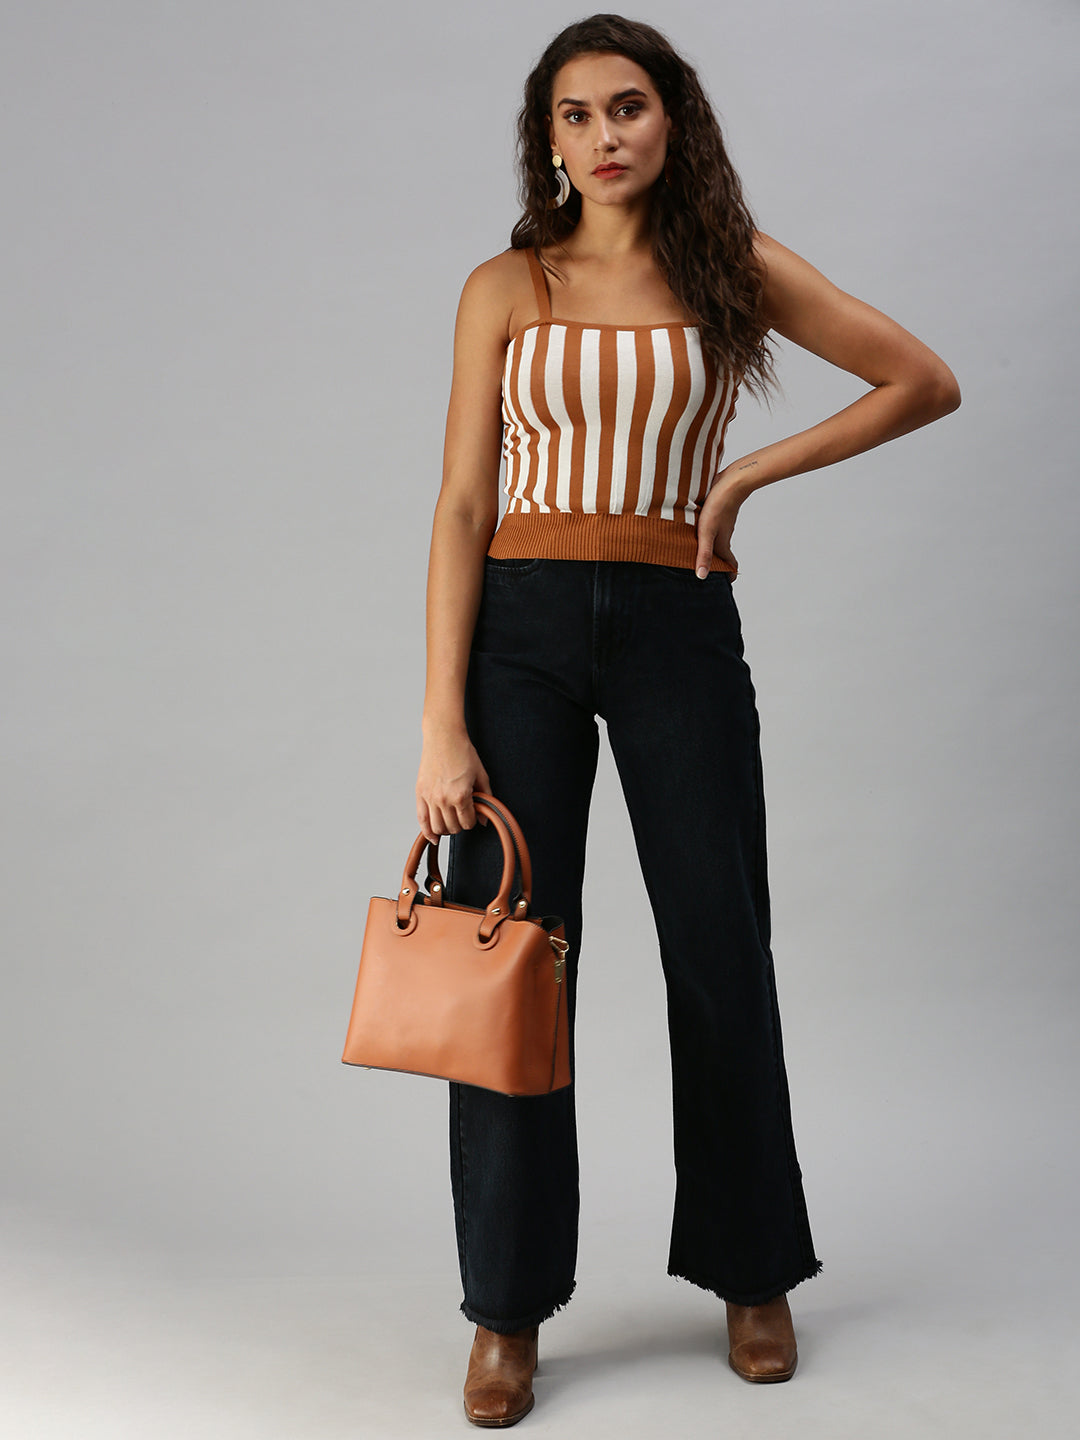 Women Shoulder Straps Striped Brown Fitted Top